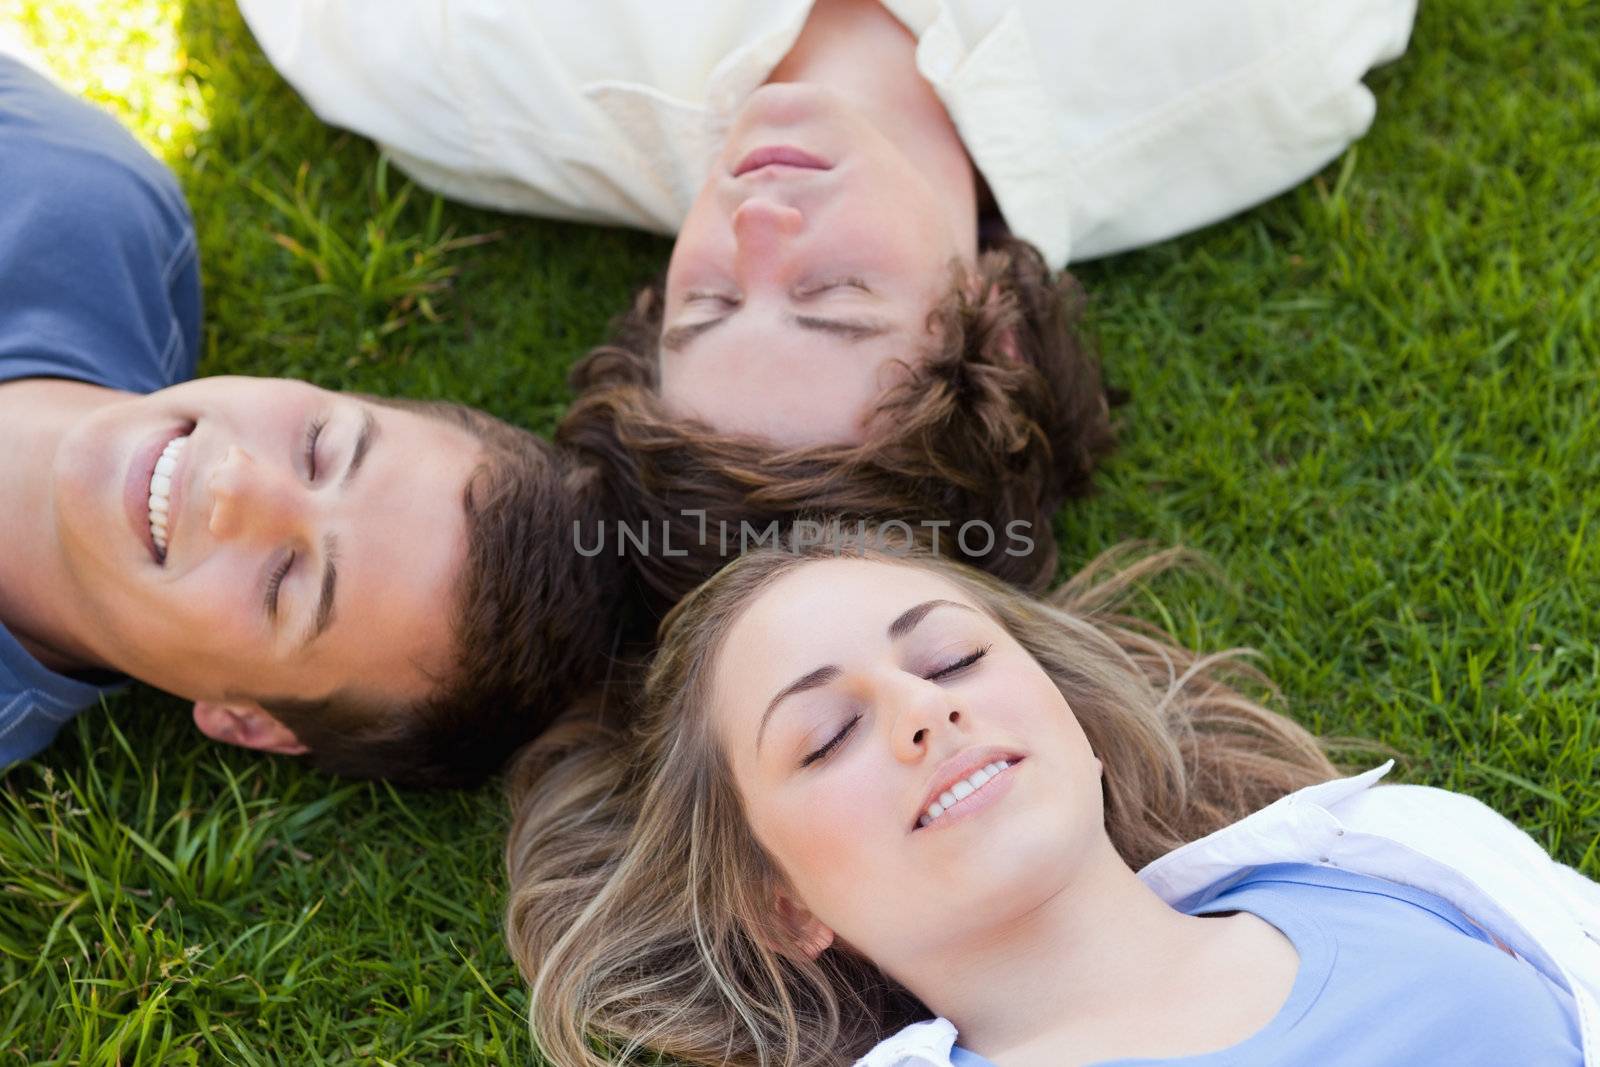 Three students resting together in the grass